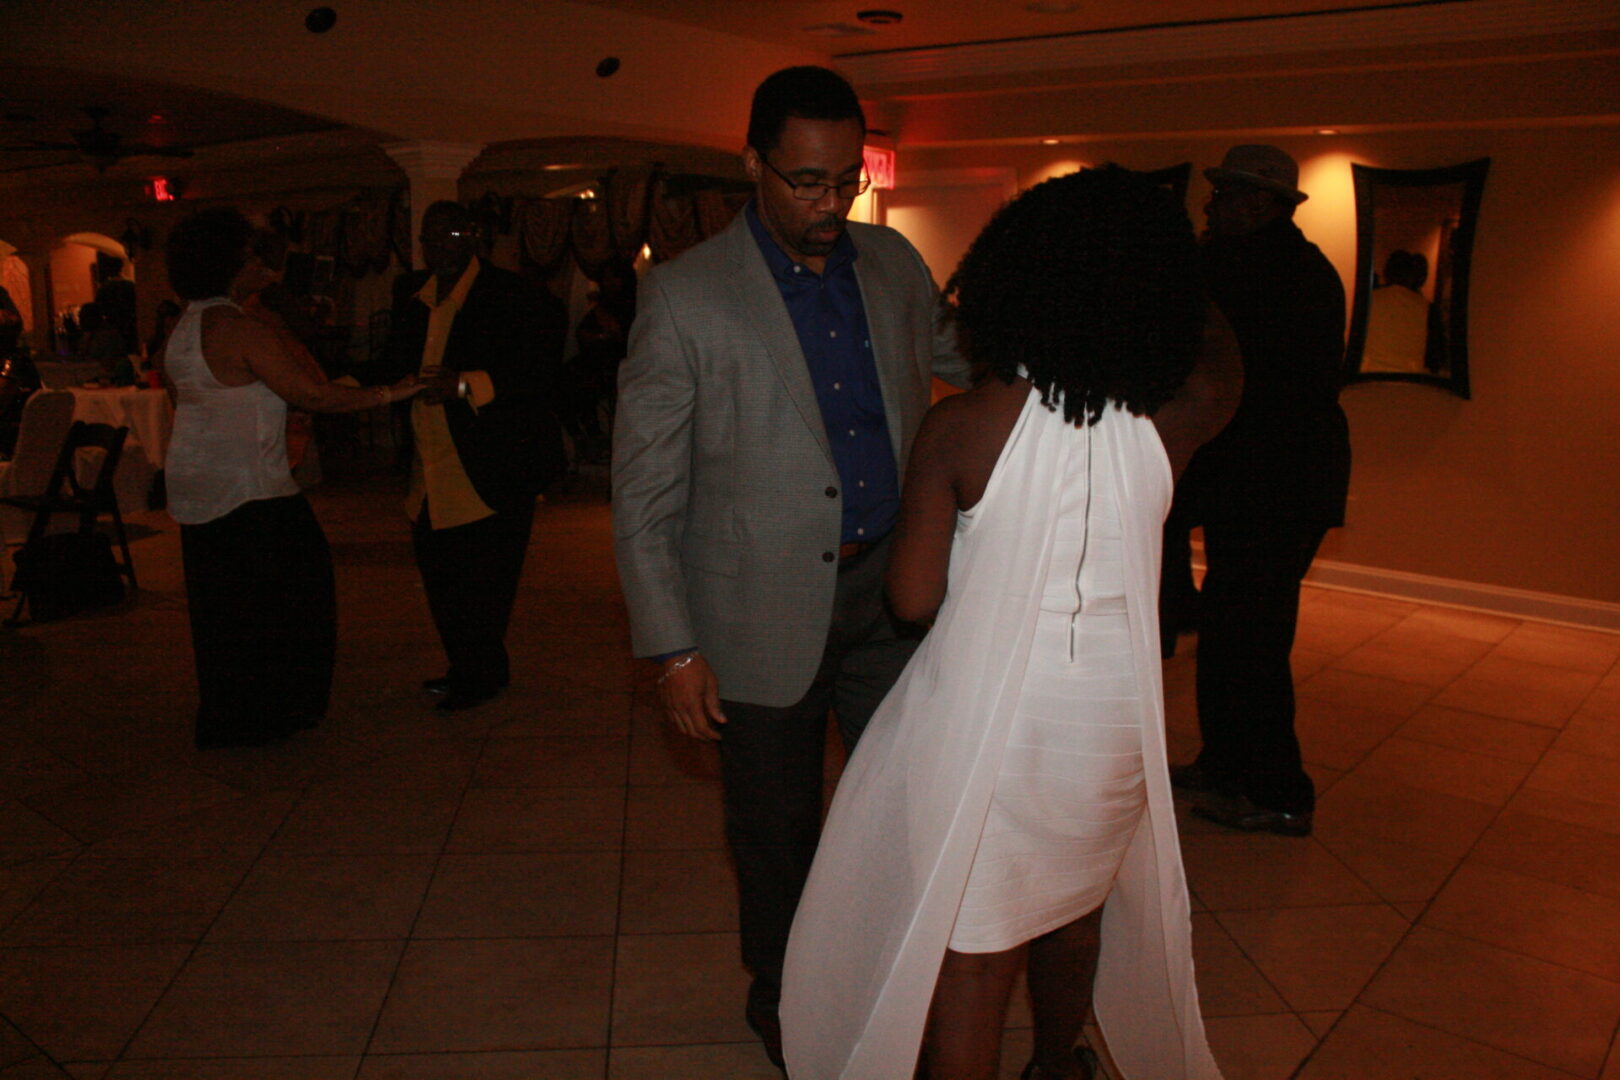 A man and woman dancing at an event.